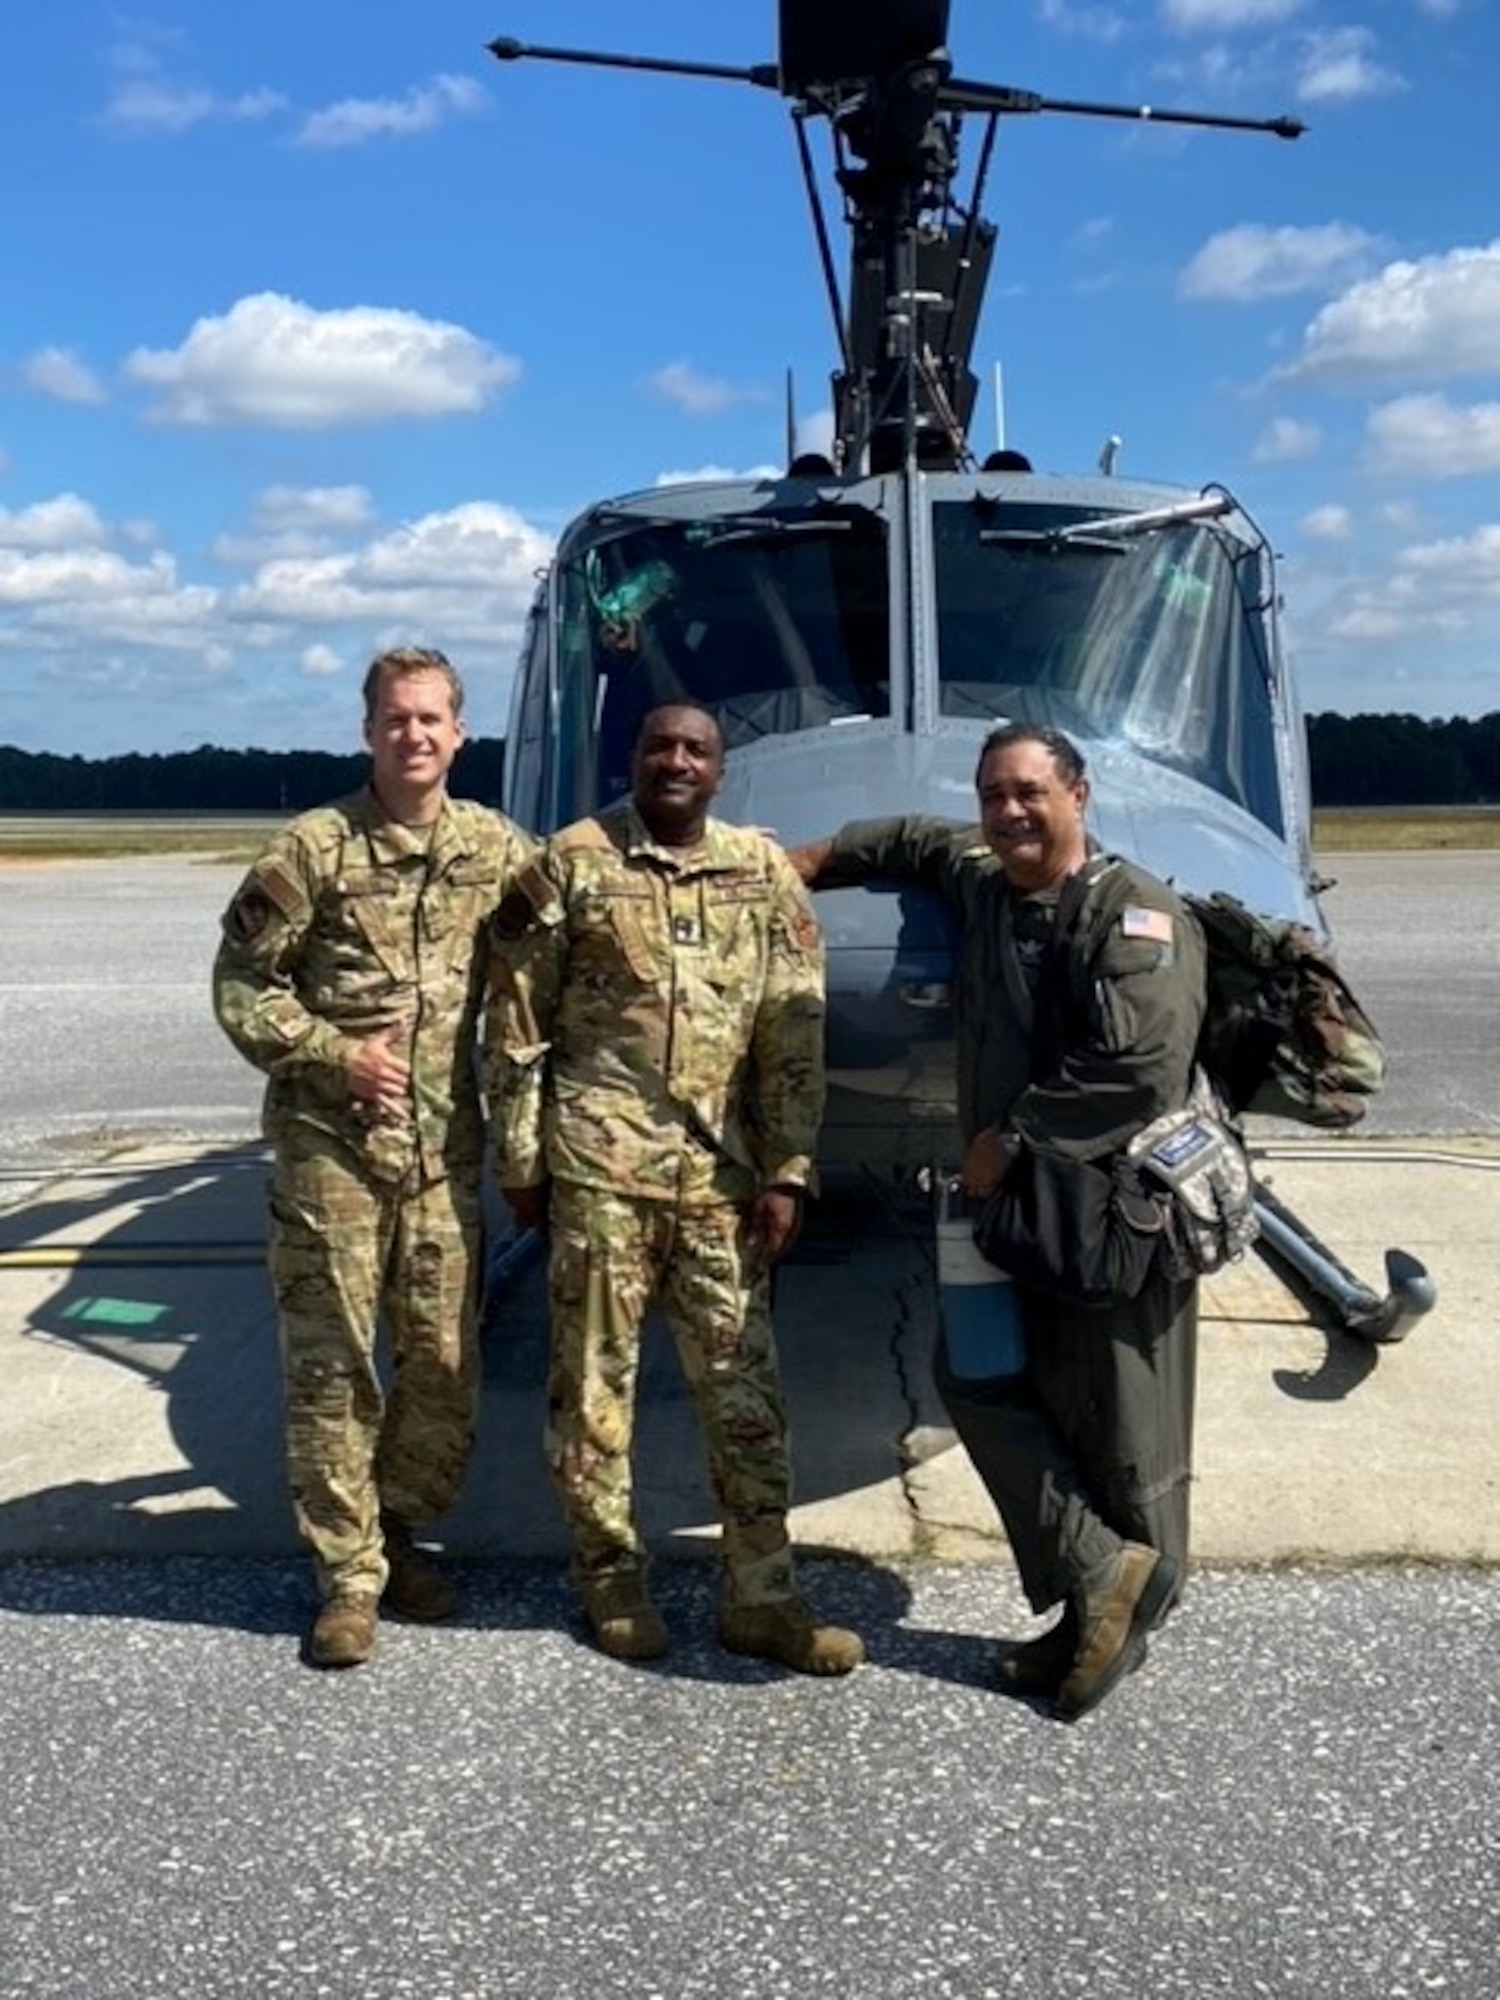 Two military helicopter pilot students pose with an instructor in front of a training helicopter at Ft. Rucker, Ala.